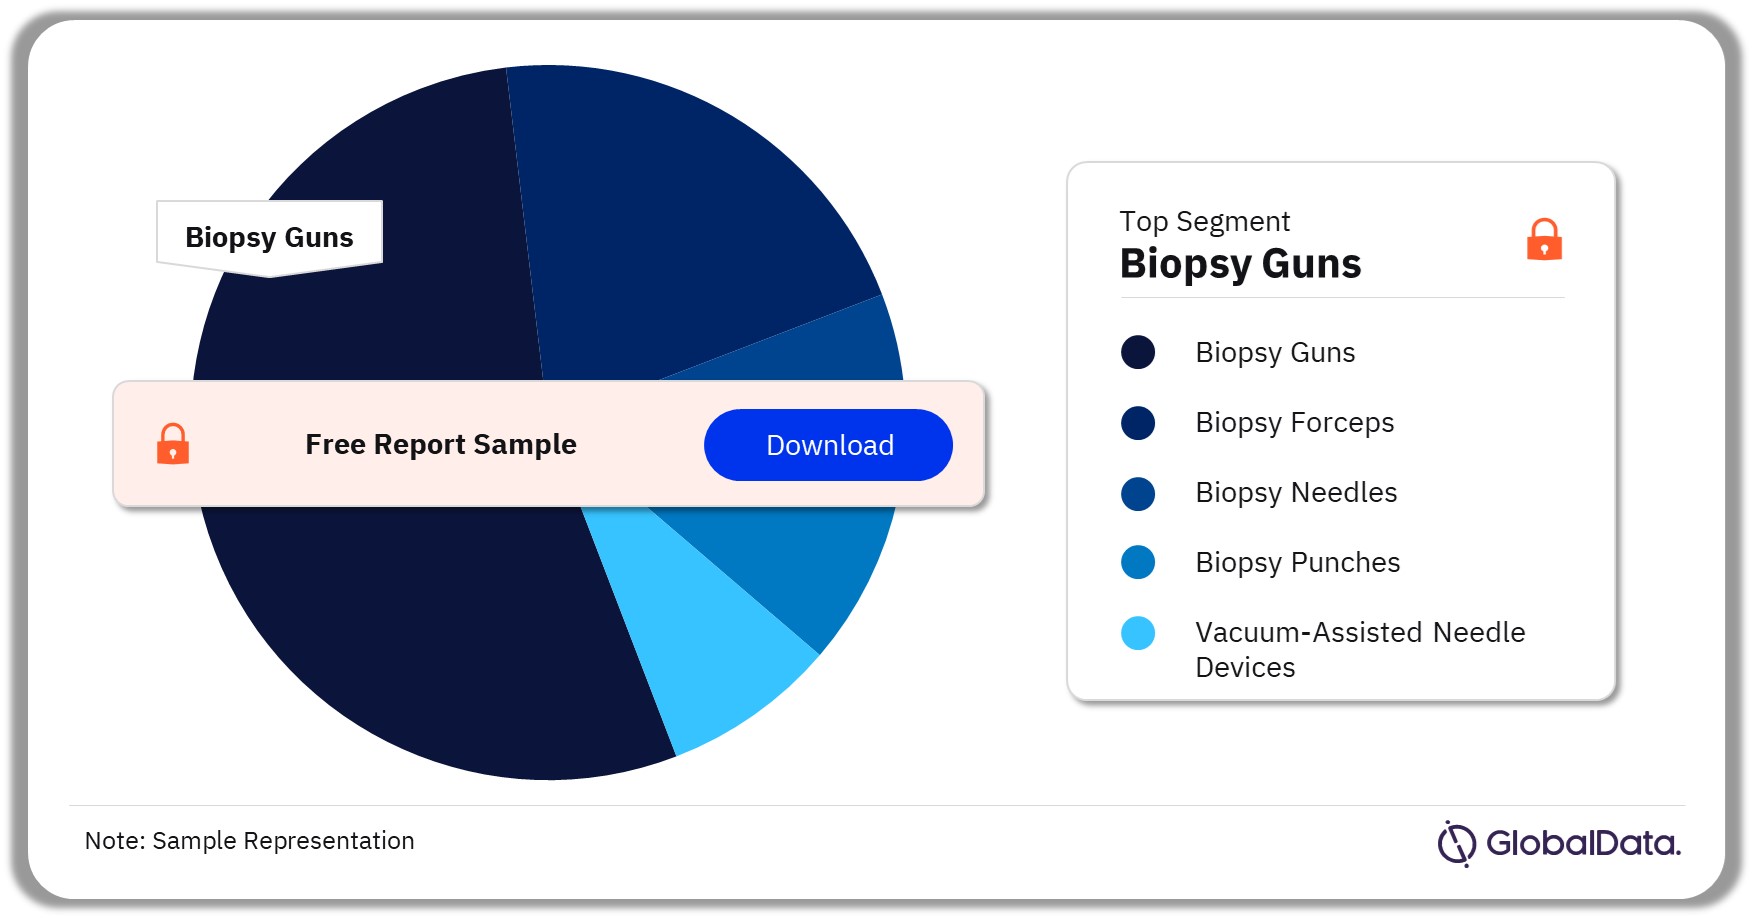 Biopsy Devices Market Analysis by Segments, 2023 (%)